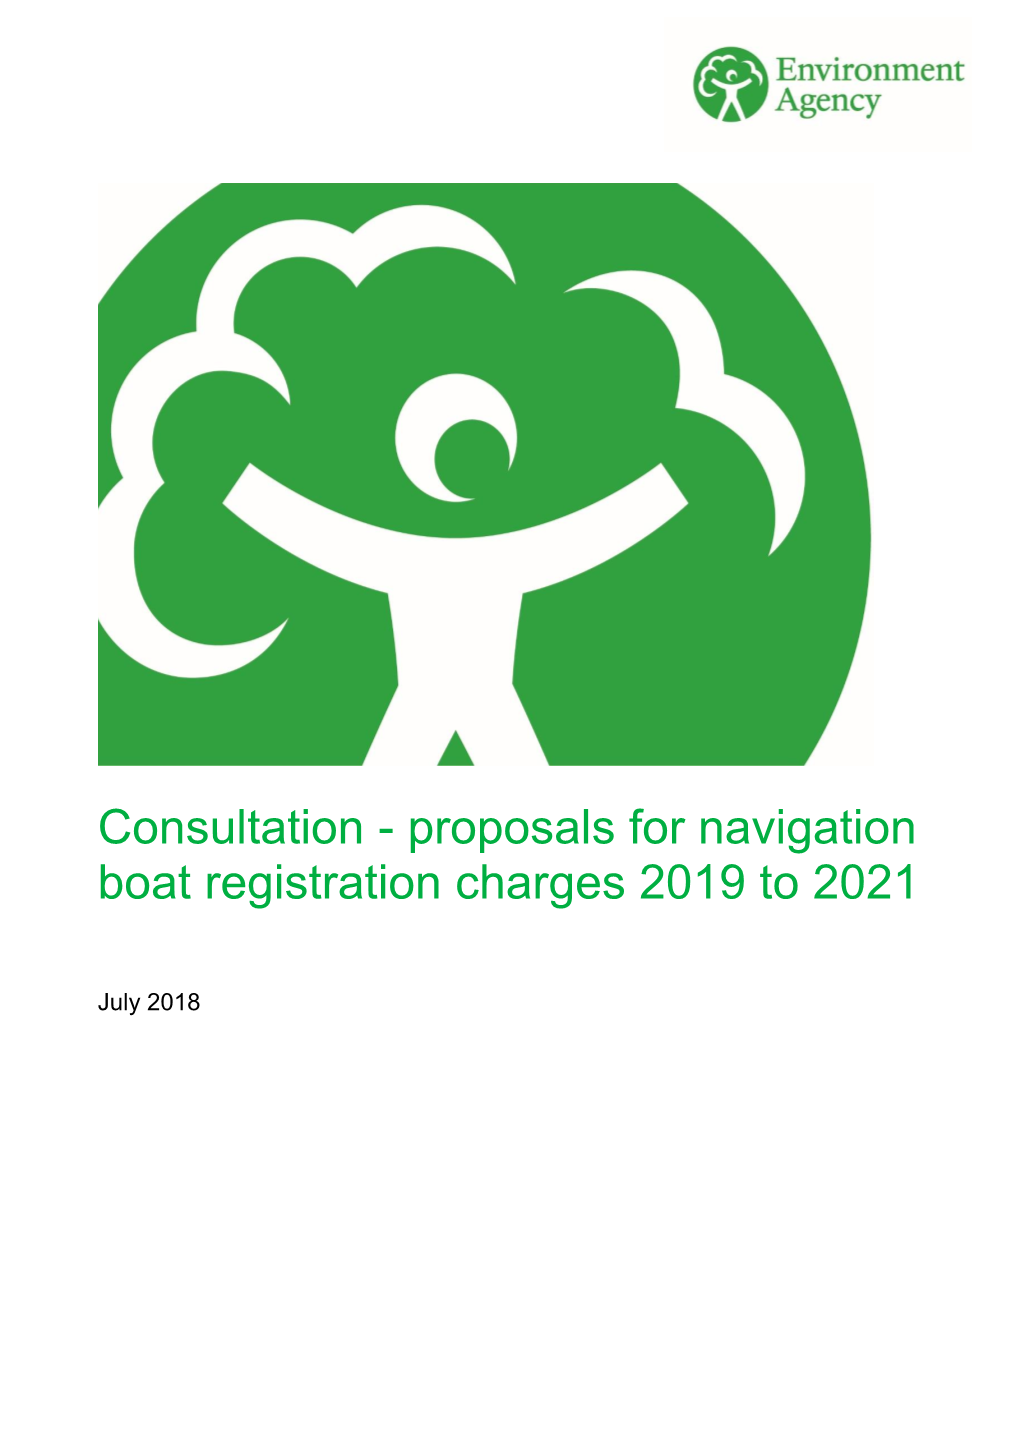 Consultation - Proposals for Navigation Boat Registration Charges 2019 to 2021